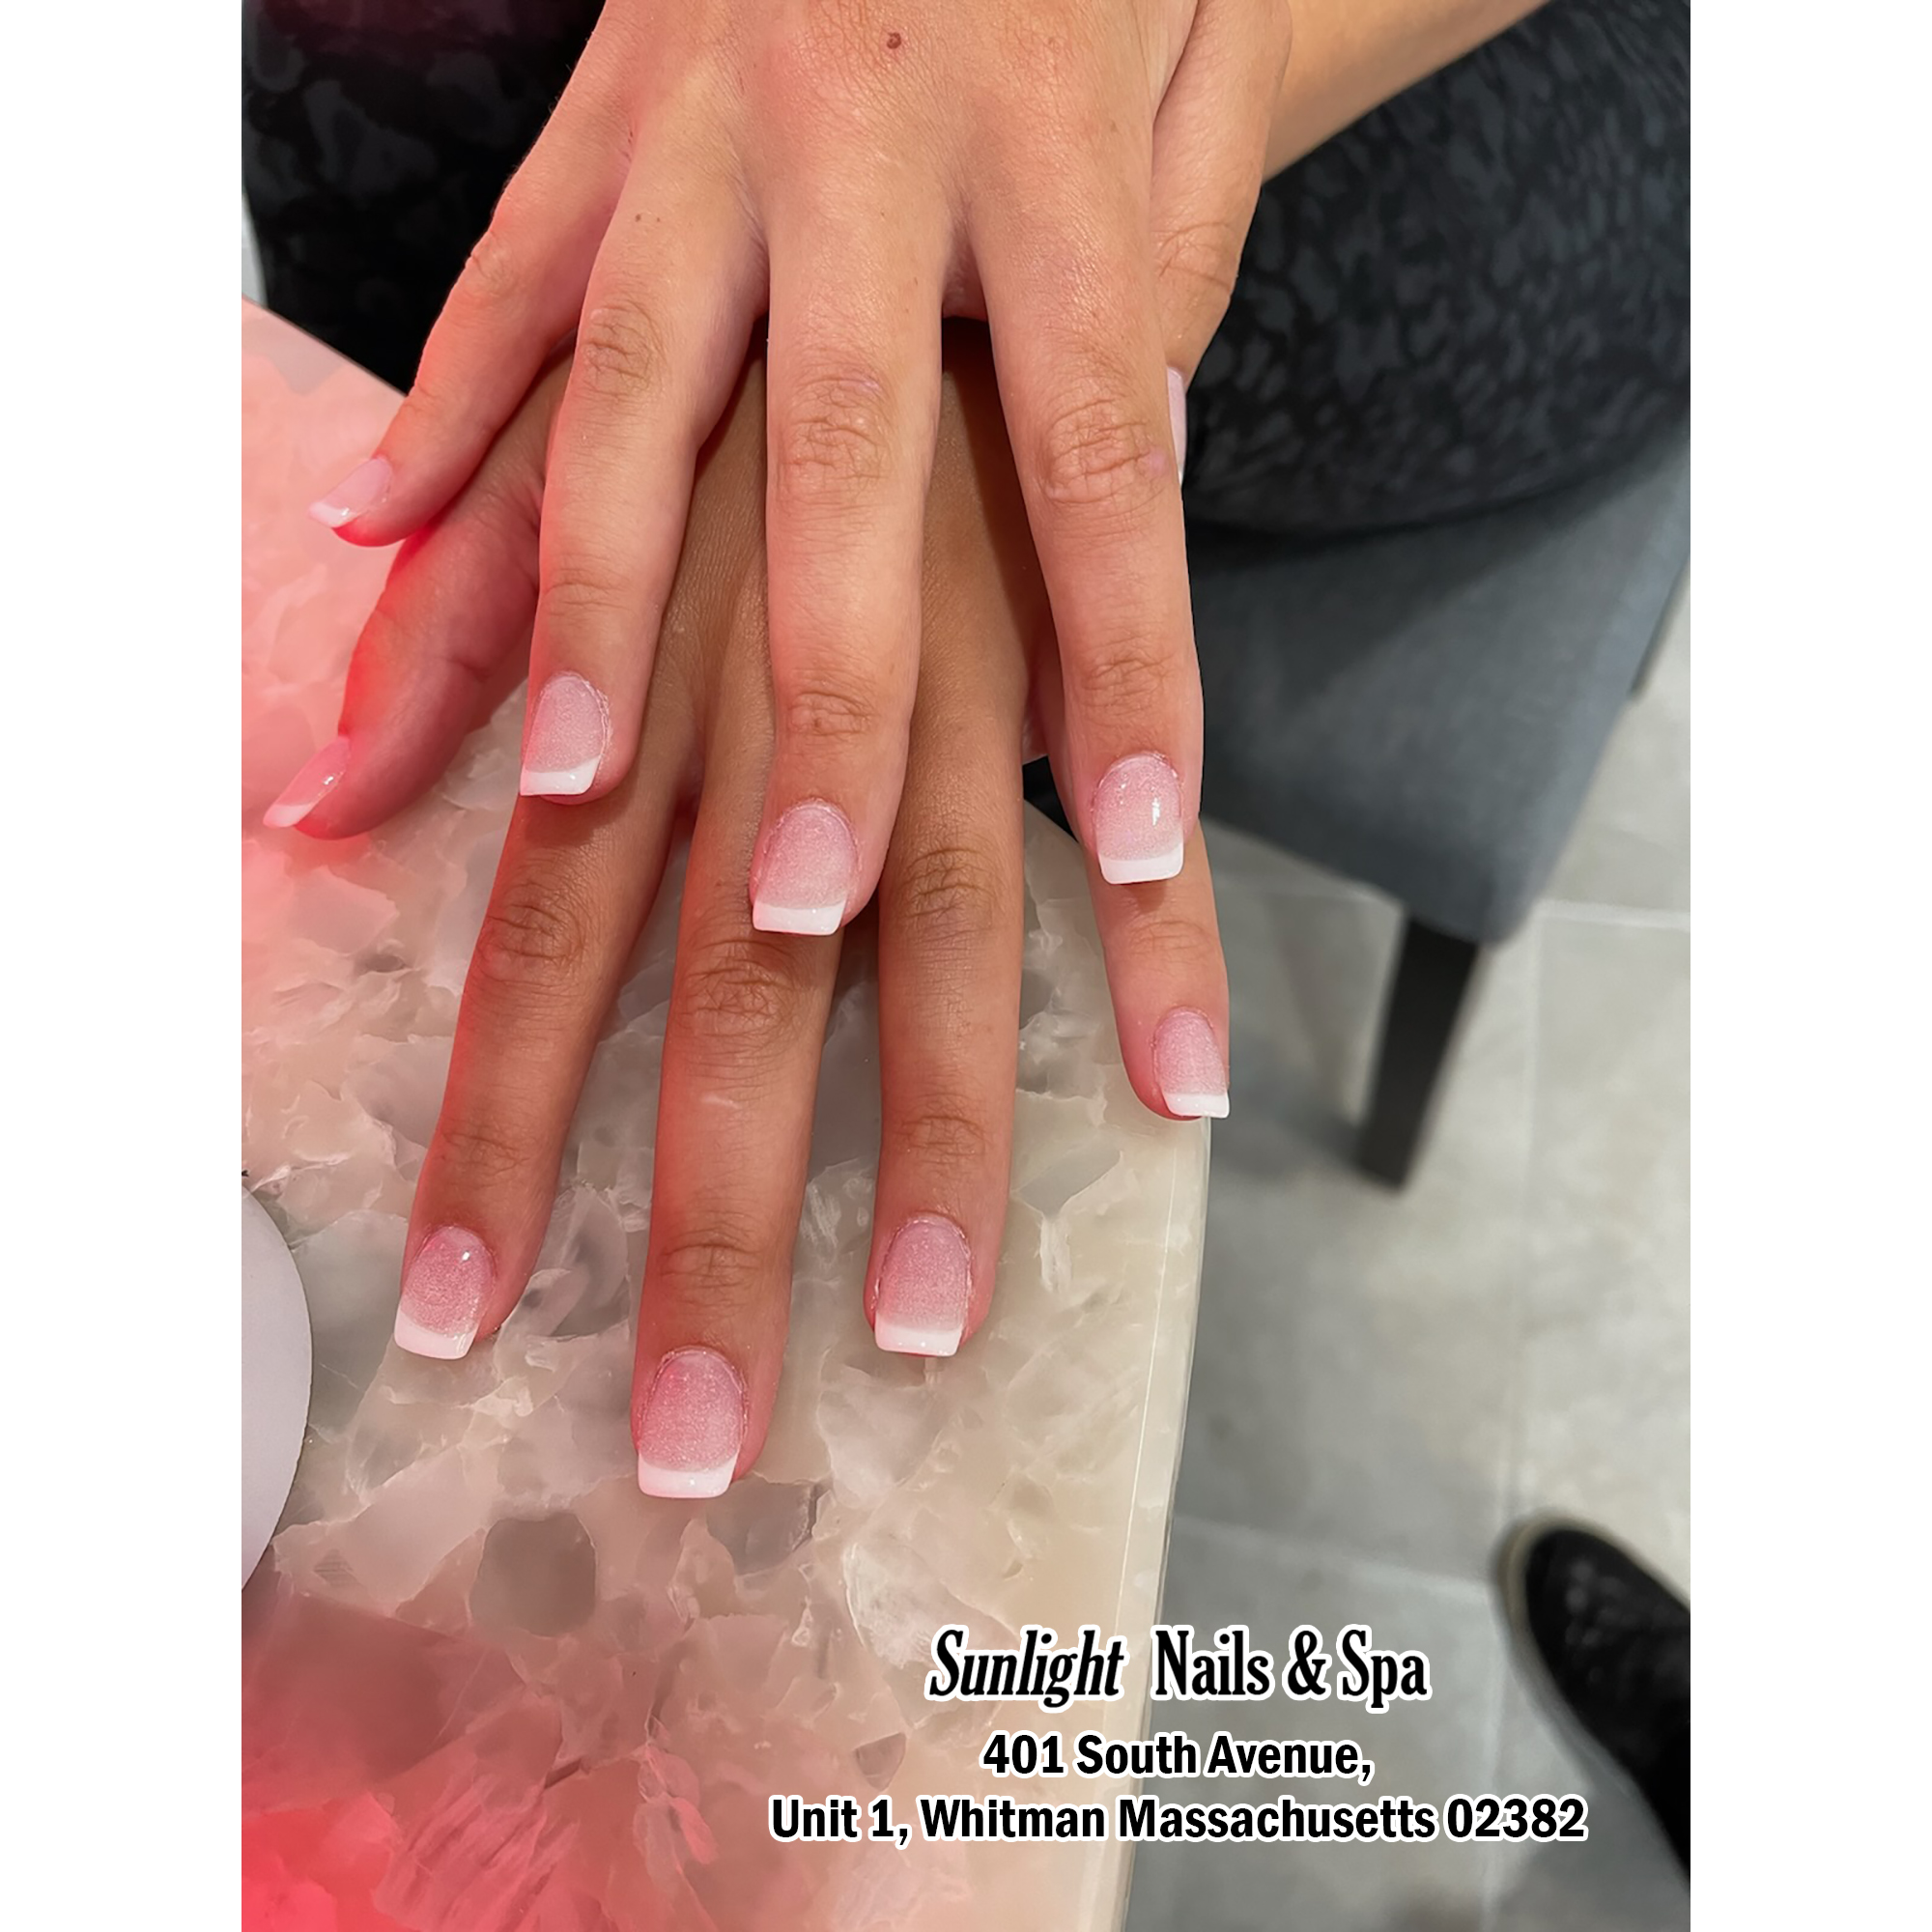 Sunlight Nails and Spa 401 South Ave #1, Whitman Massachusetts 02382